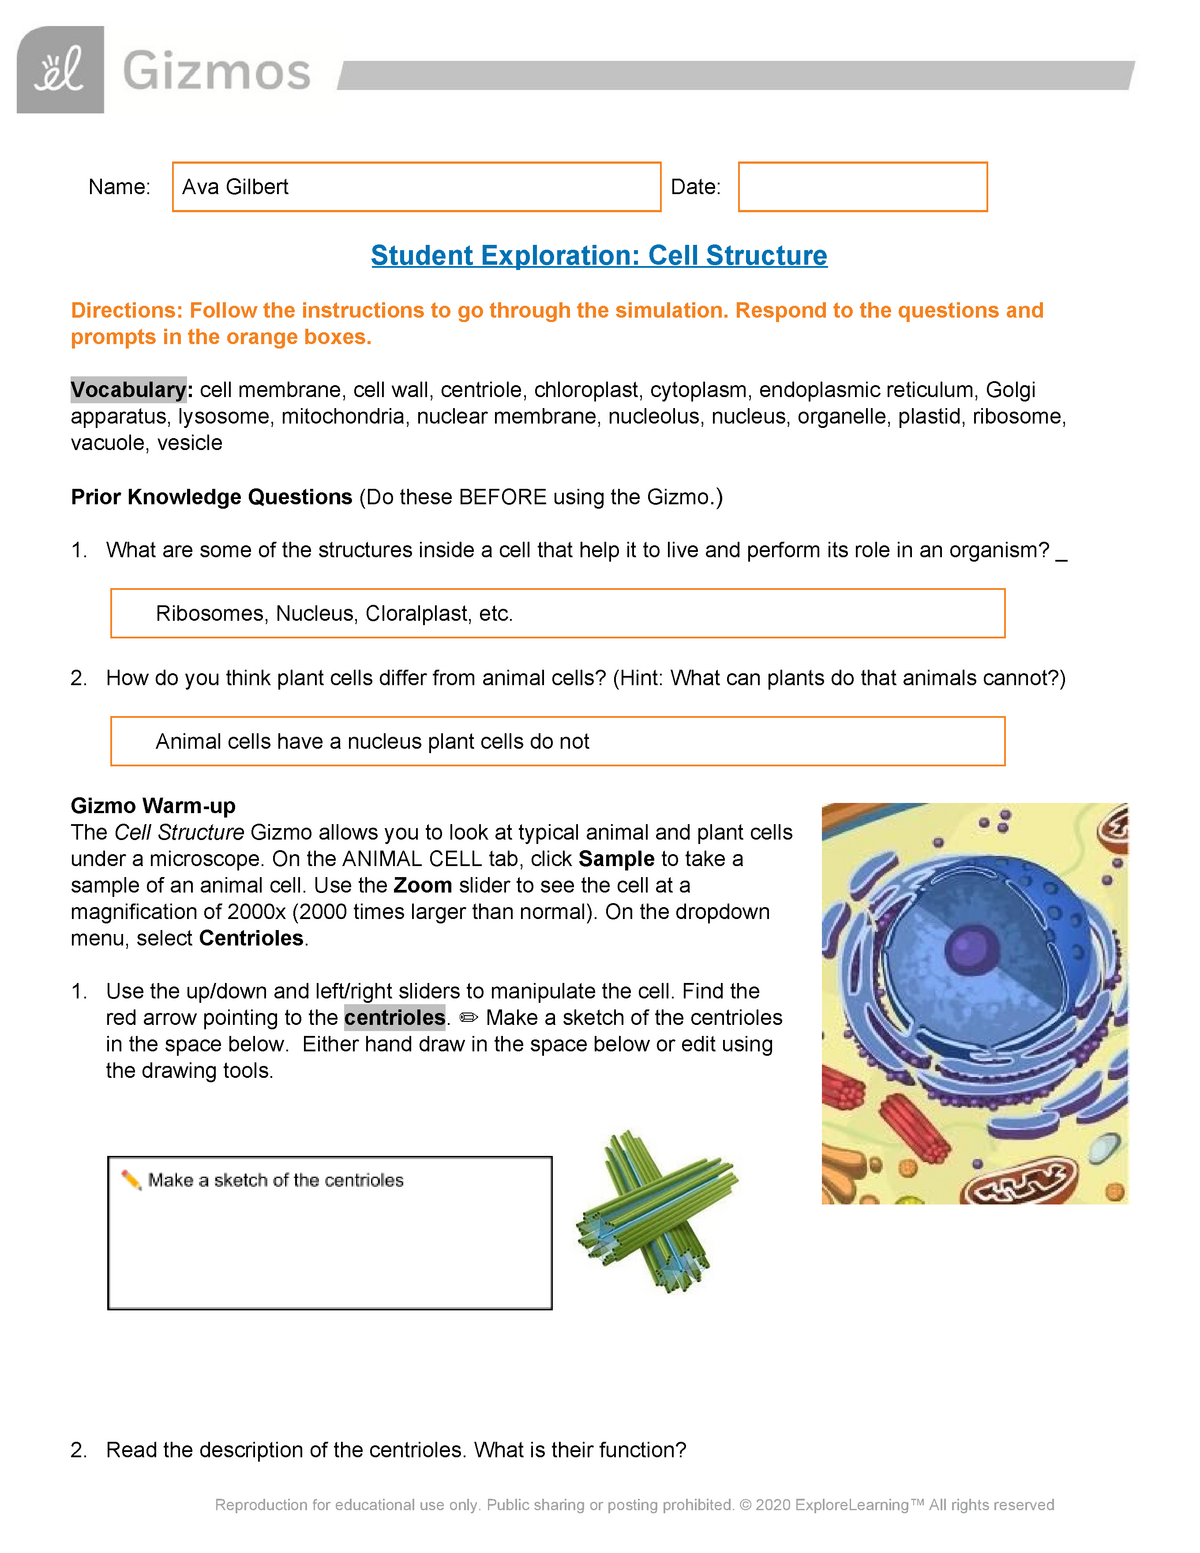 Copy of Cell Structure Gizmo Data Sheet - Student Exploration: Cell  Structure Directions: Follow the - Studocu